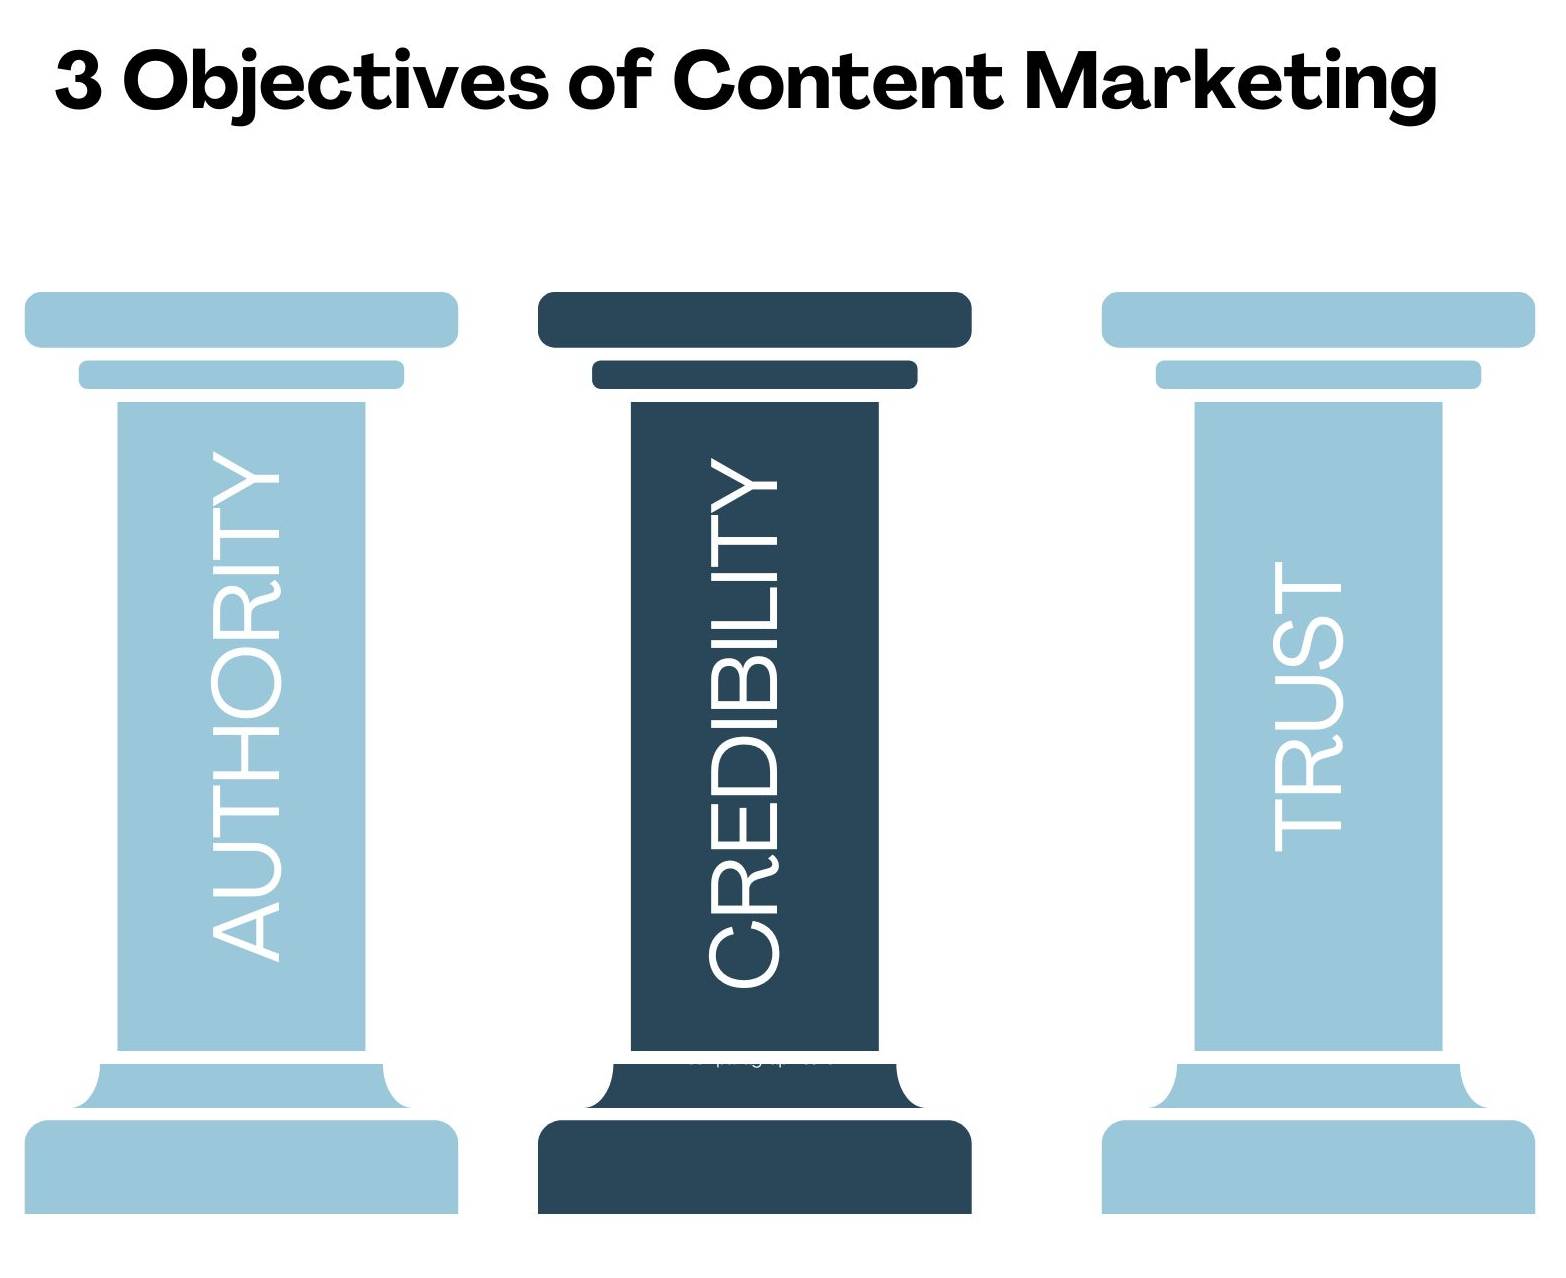 Pillars showing the three objectives of content marketing 